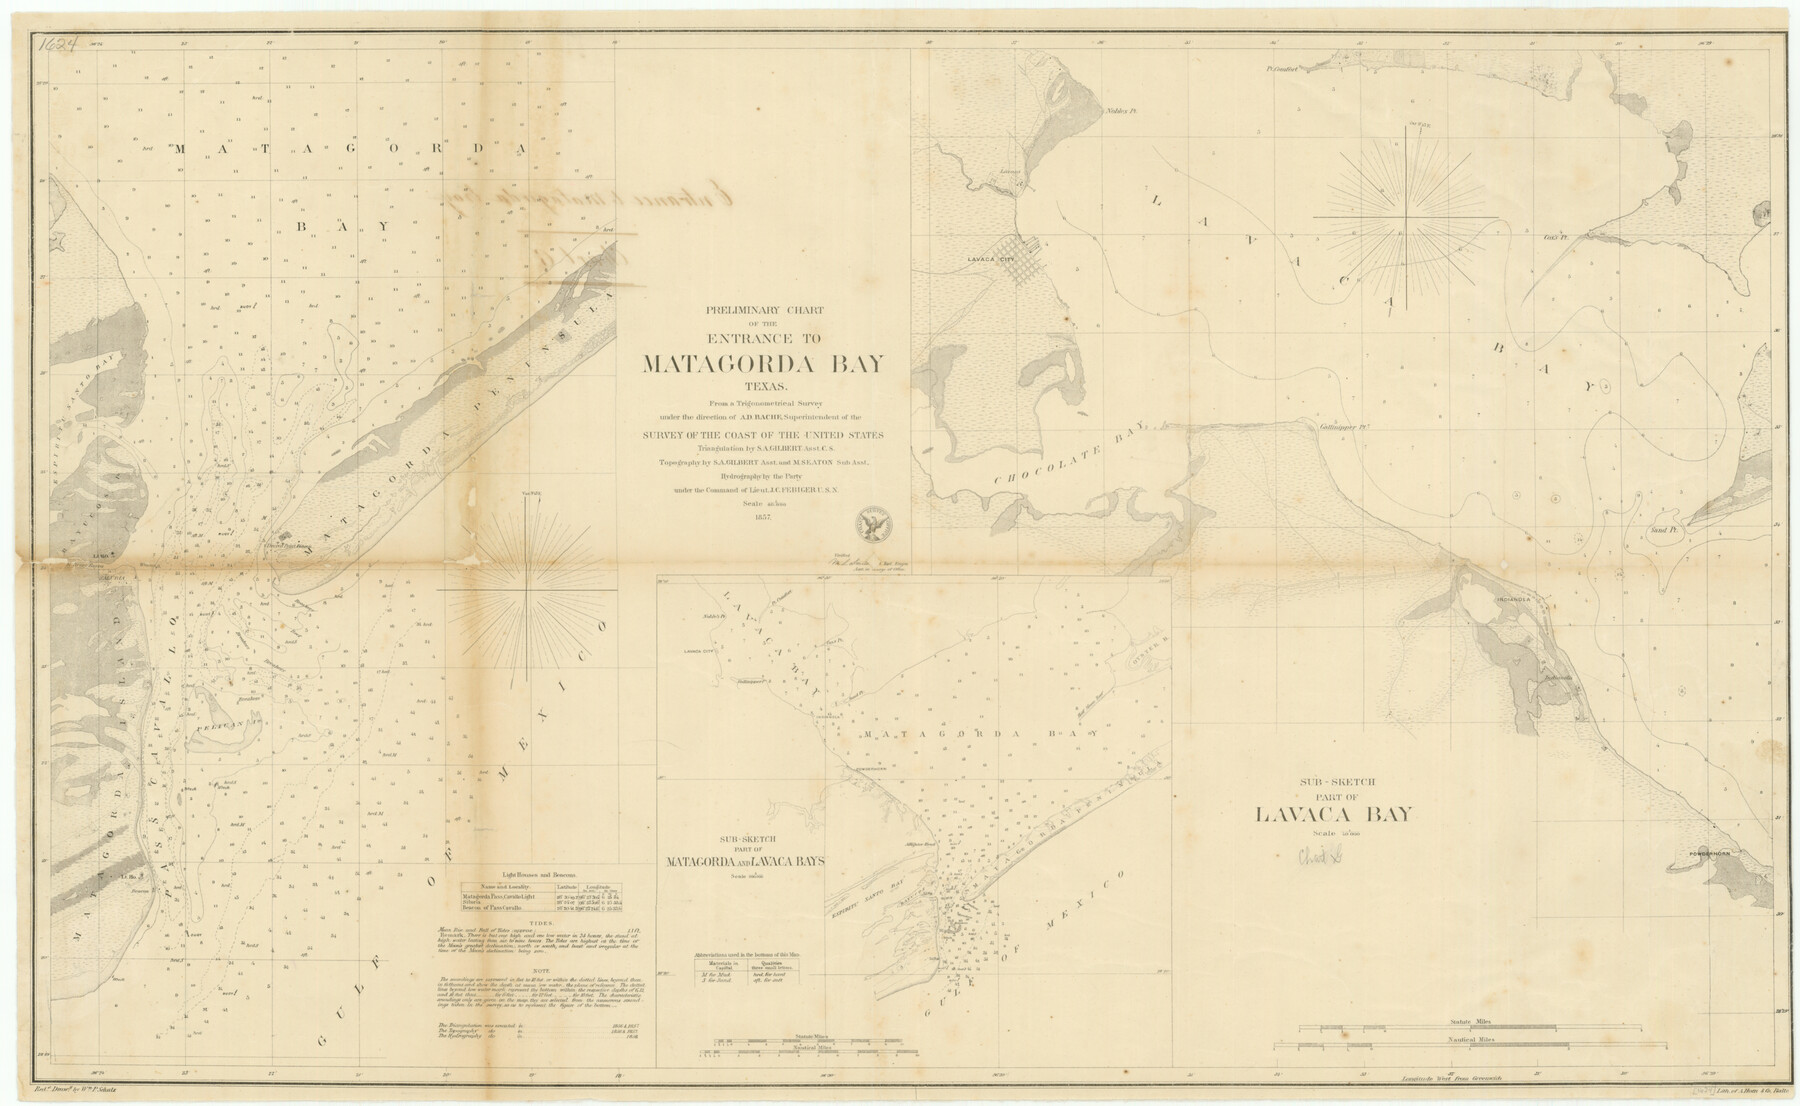 76247, Preliminary Chart of the Entrance to Matagorda Bay, Texas, Texas State Library and Archives